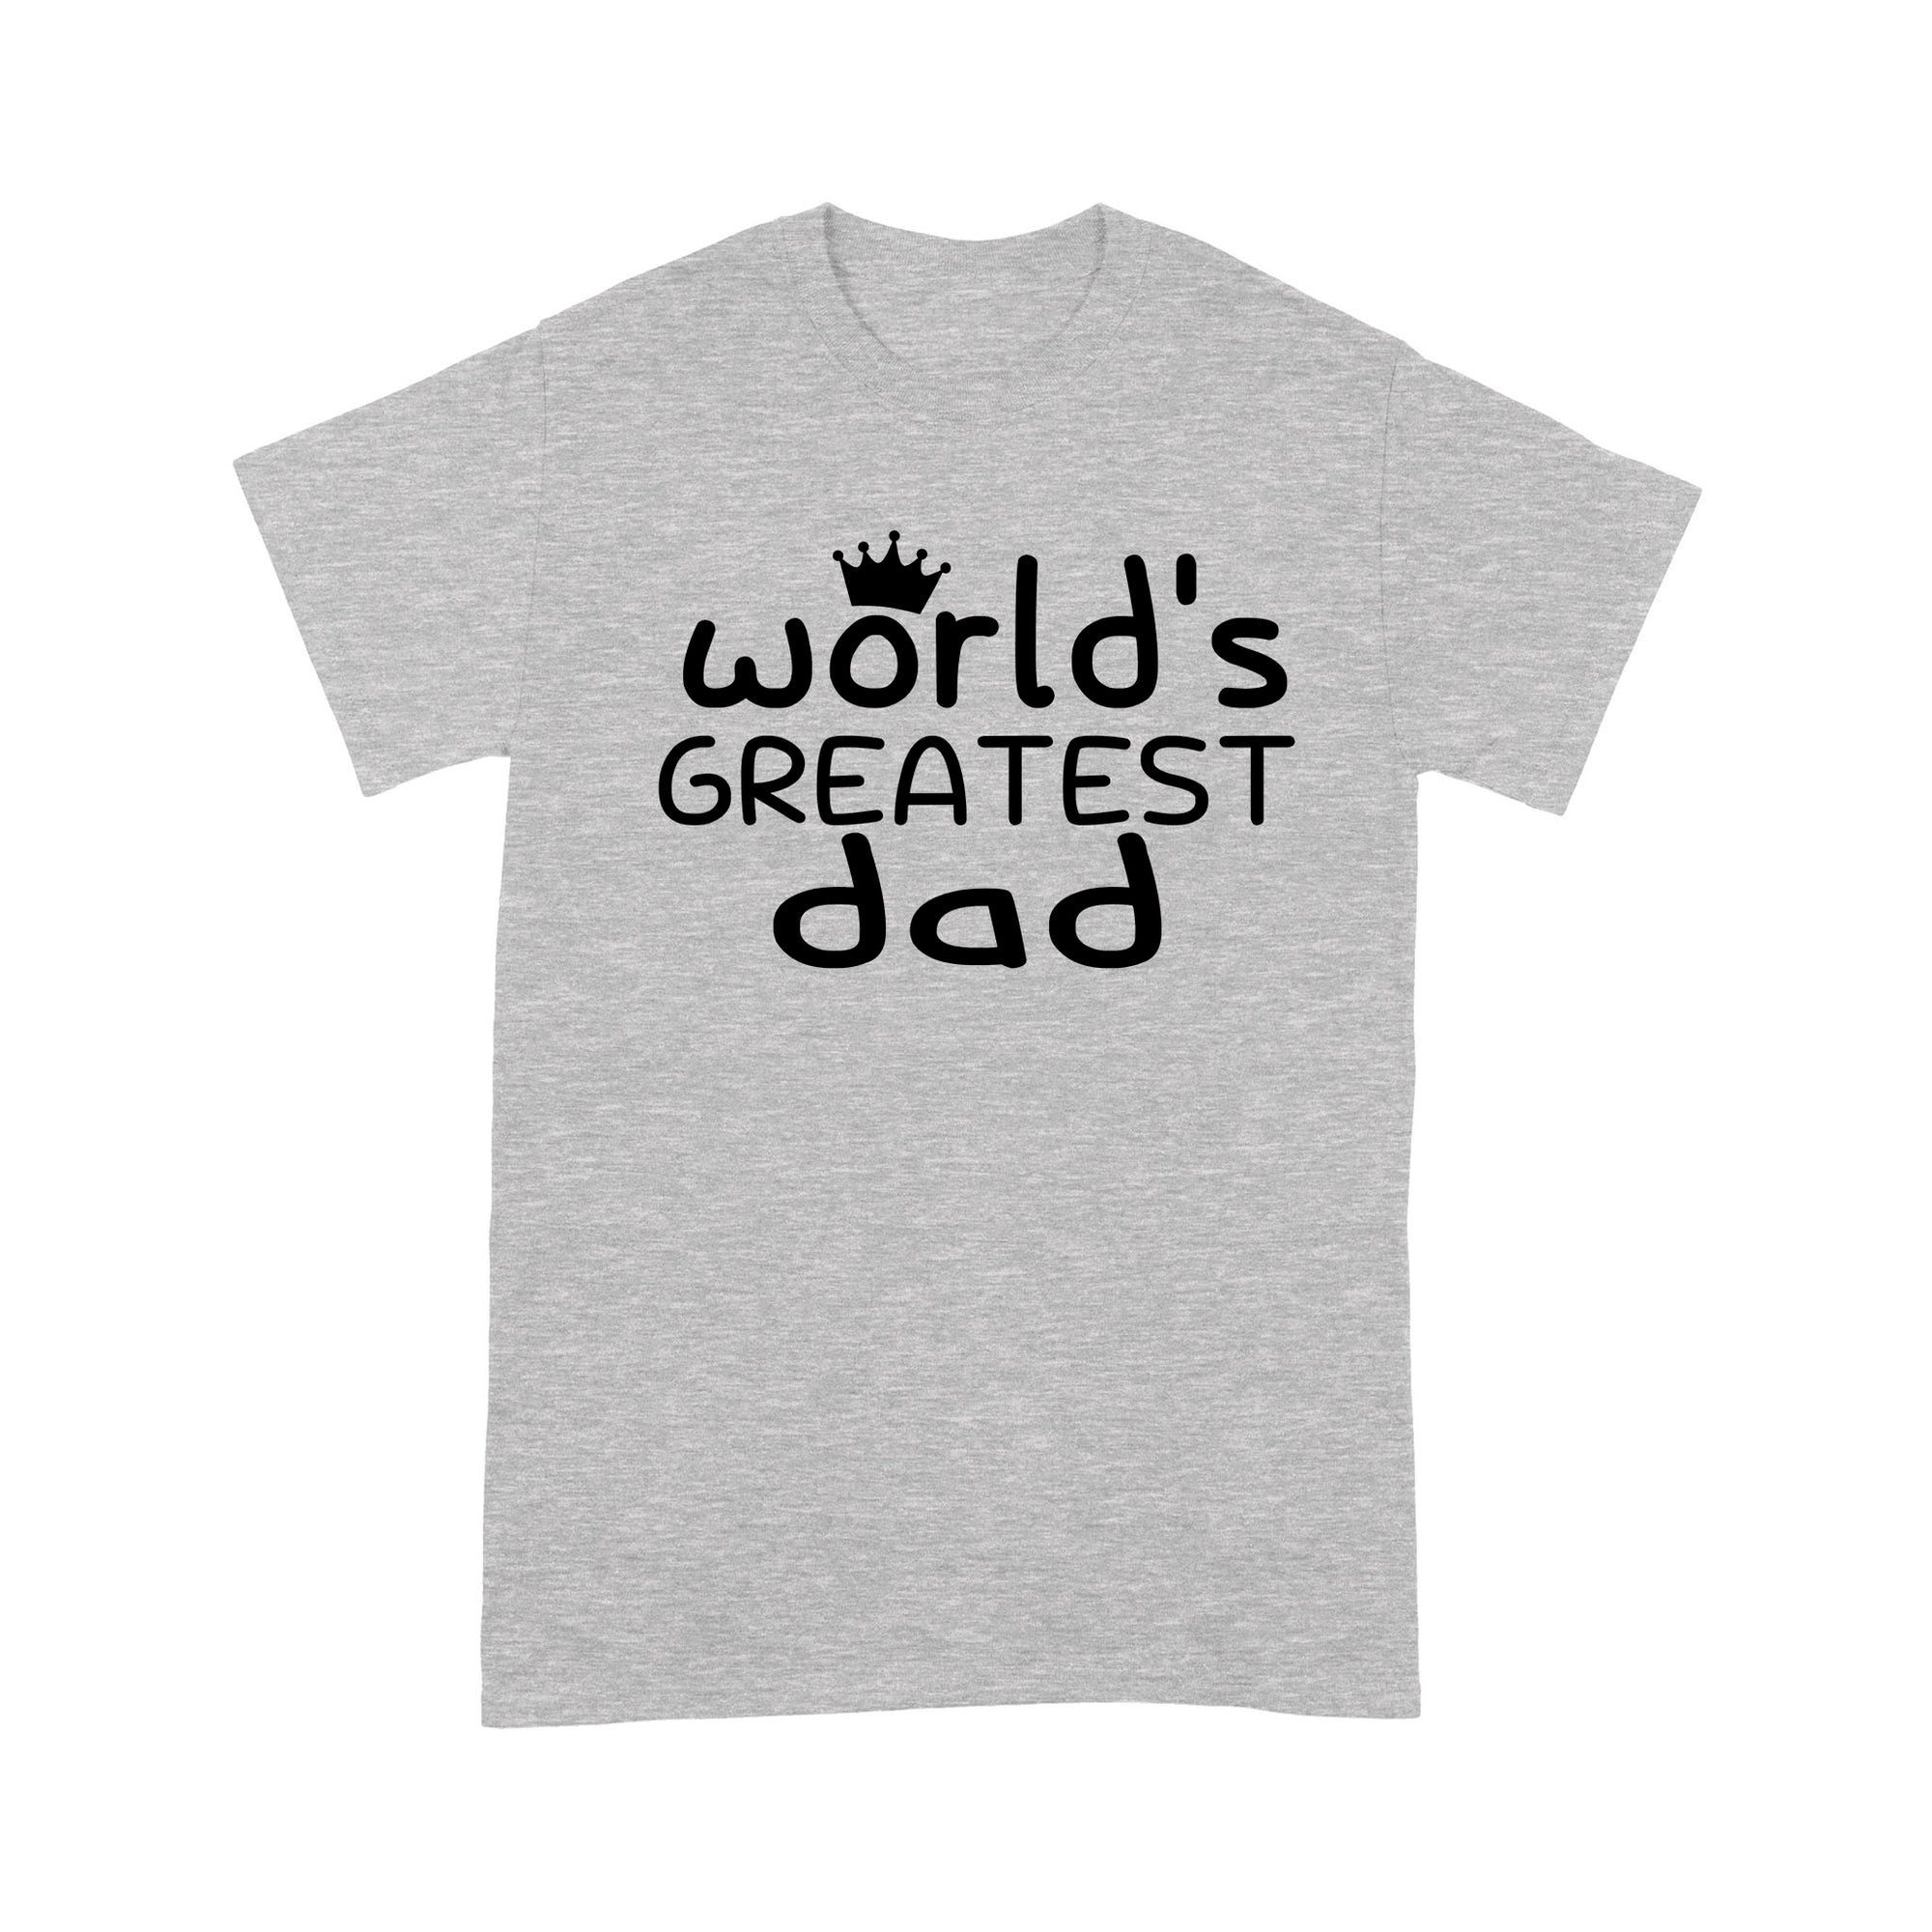 Gift Ideas for Dad World's Greatest Dad - Standard T-shirt